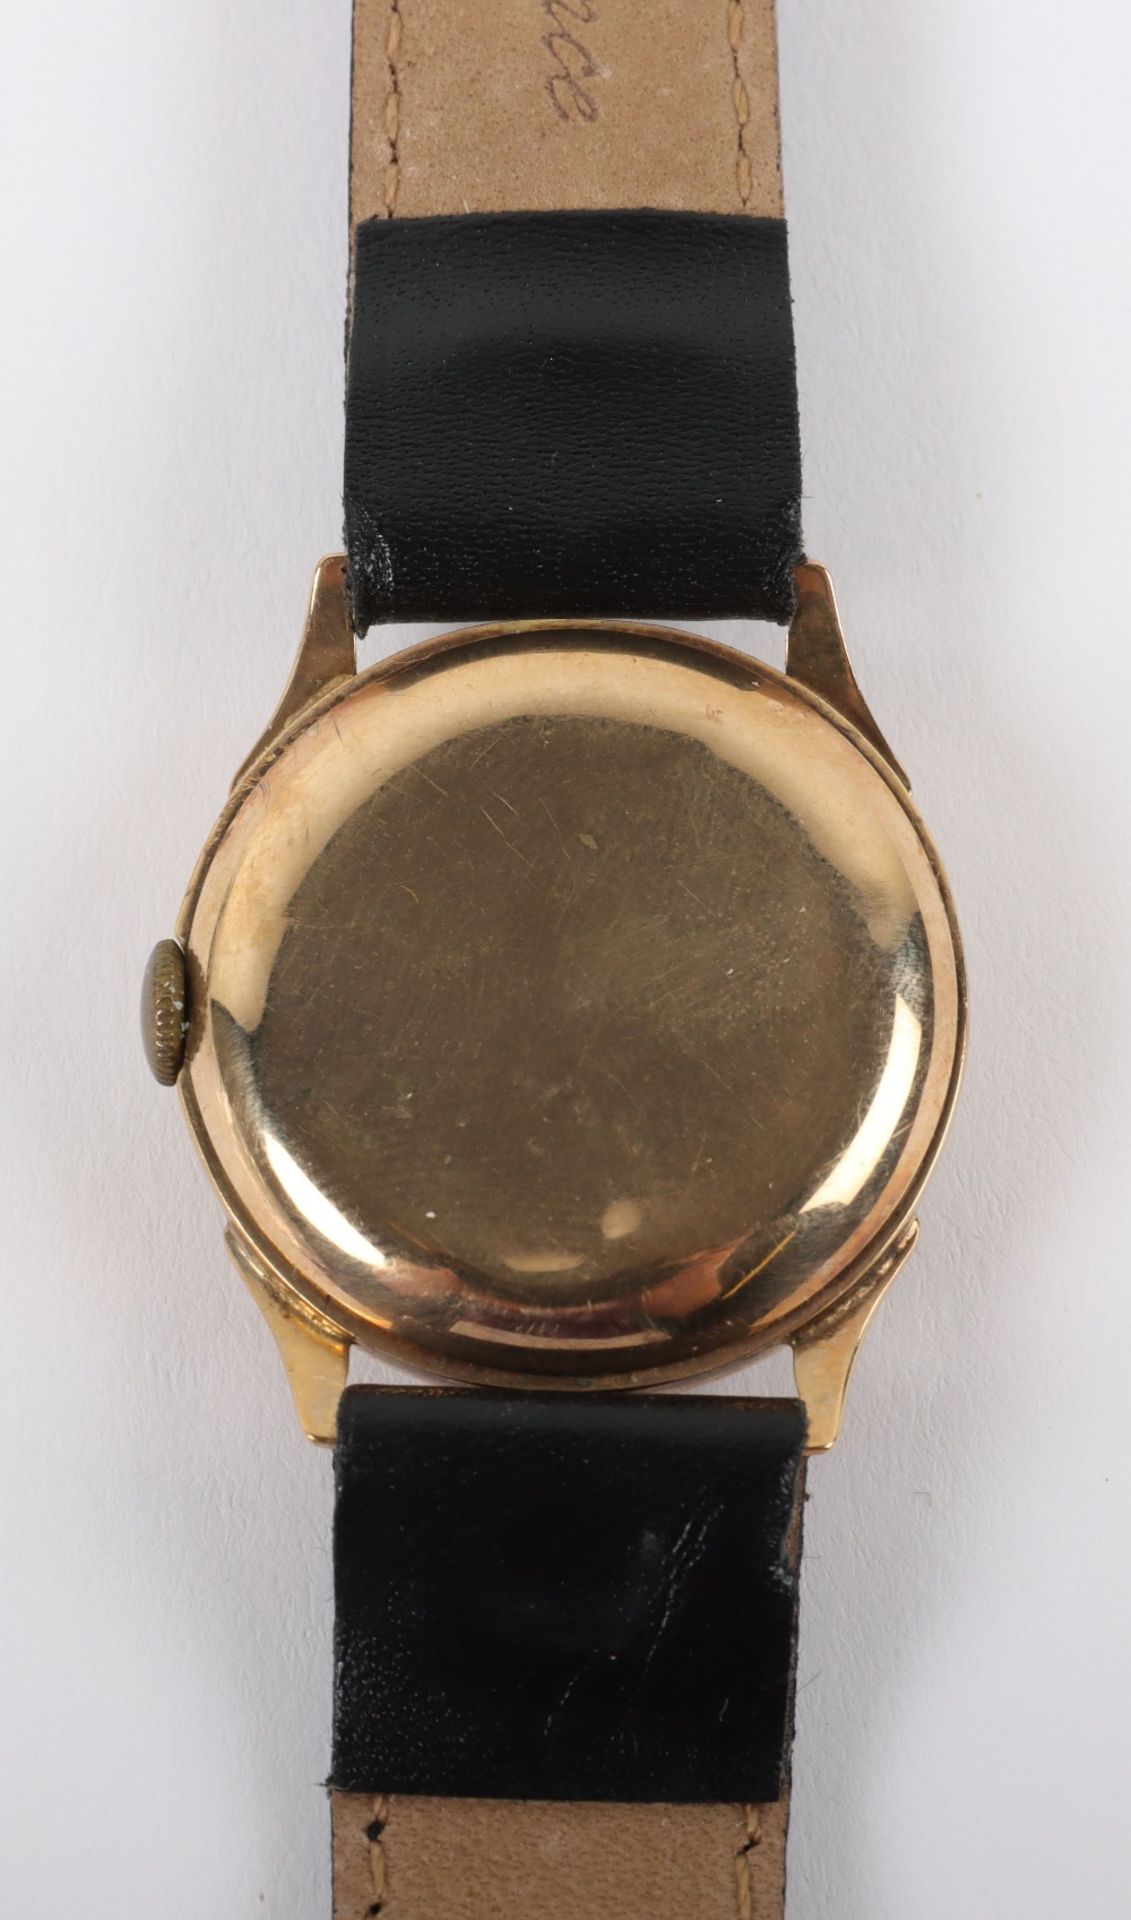 A vintage 9ct gold Swiss made wristwatch, circa 1940 - Image 5 of 7